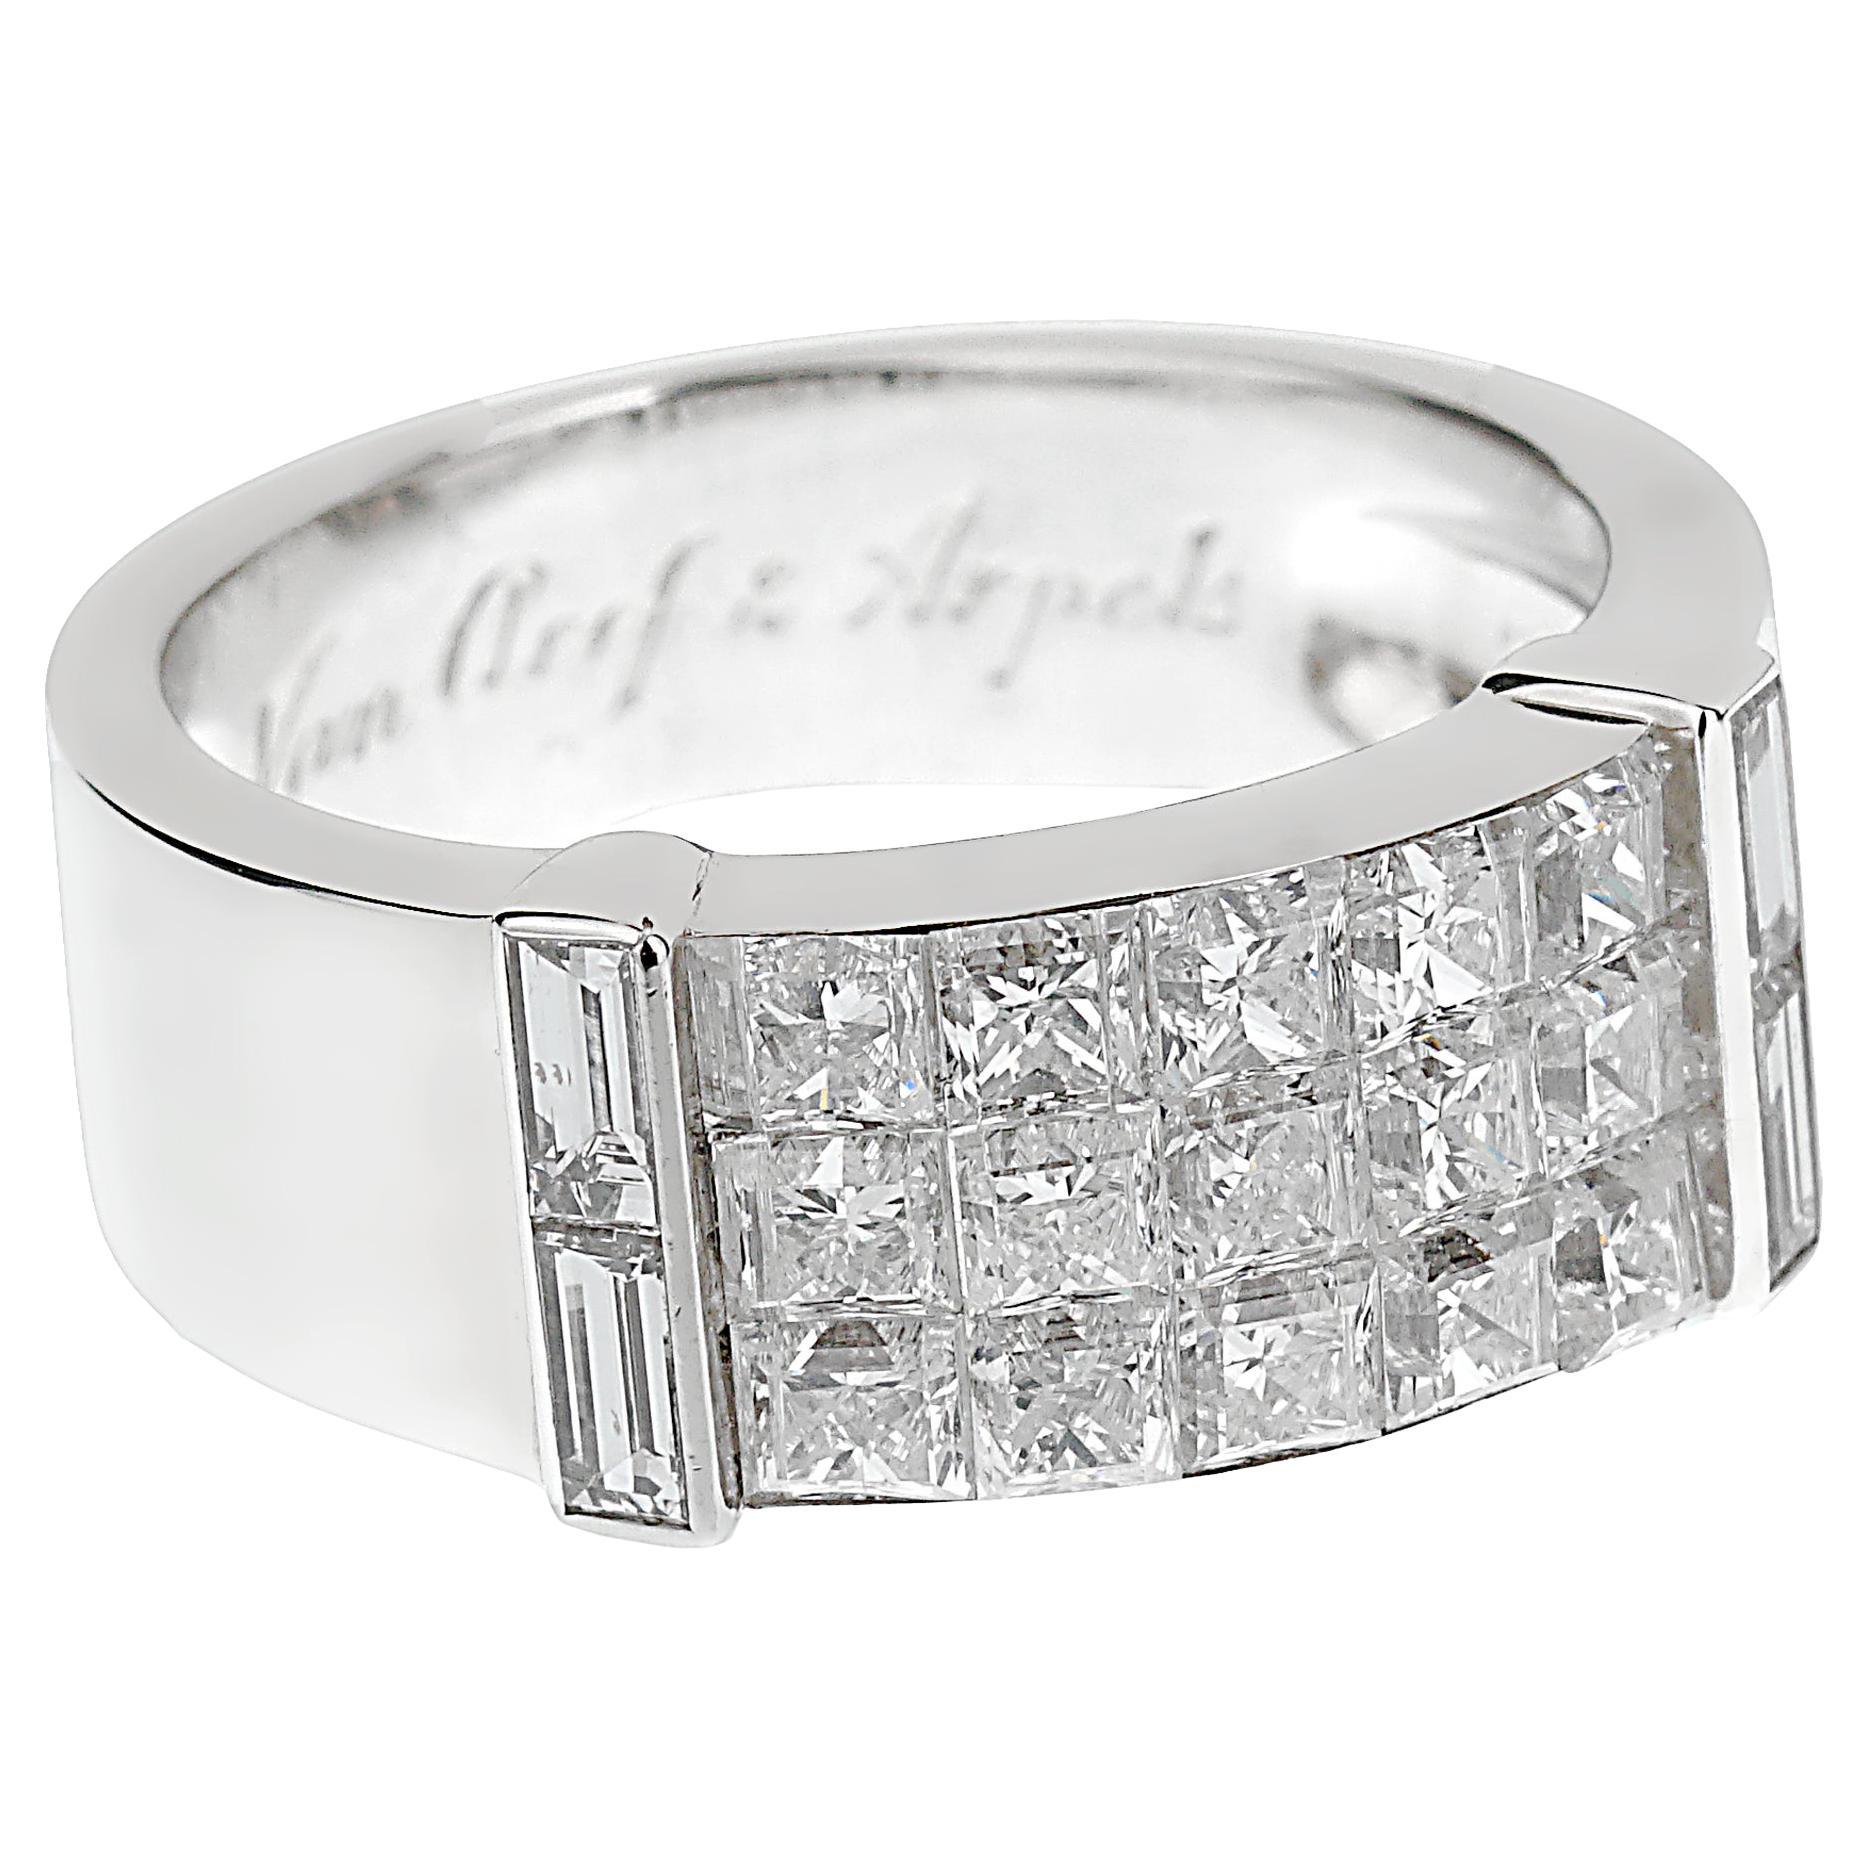 Van Cleef & Arpels Mystery Setting White Gold Cocktail Ring For Sale